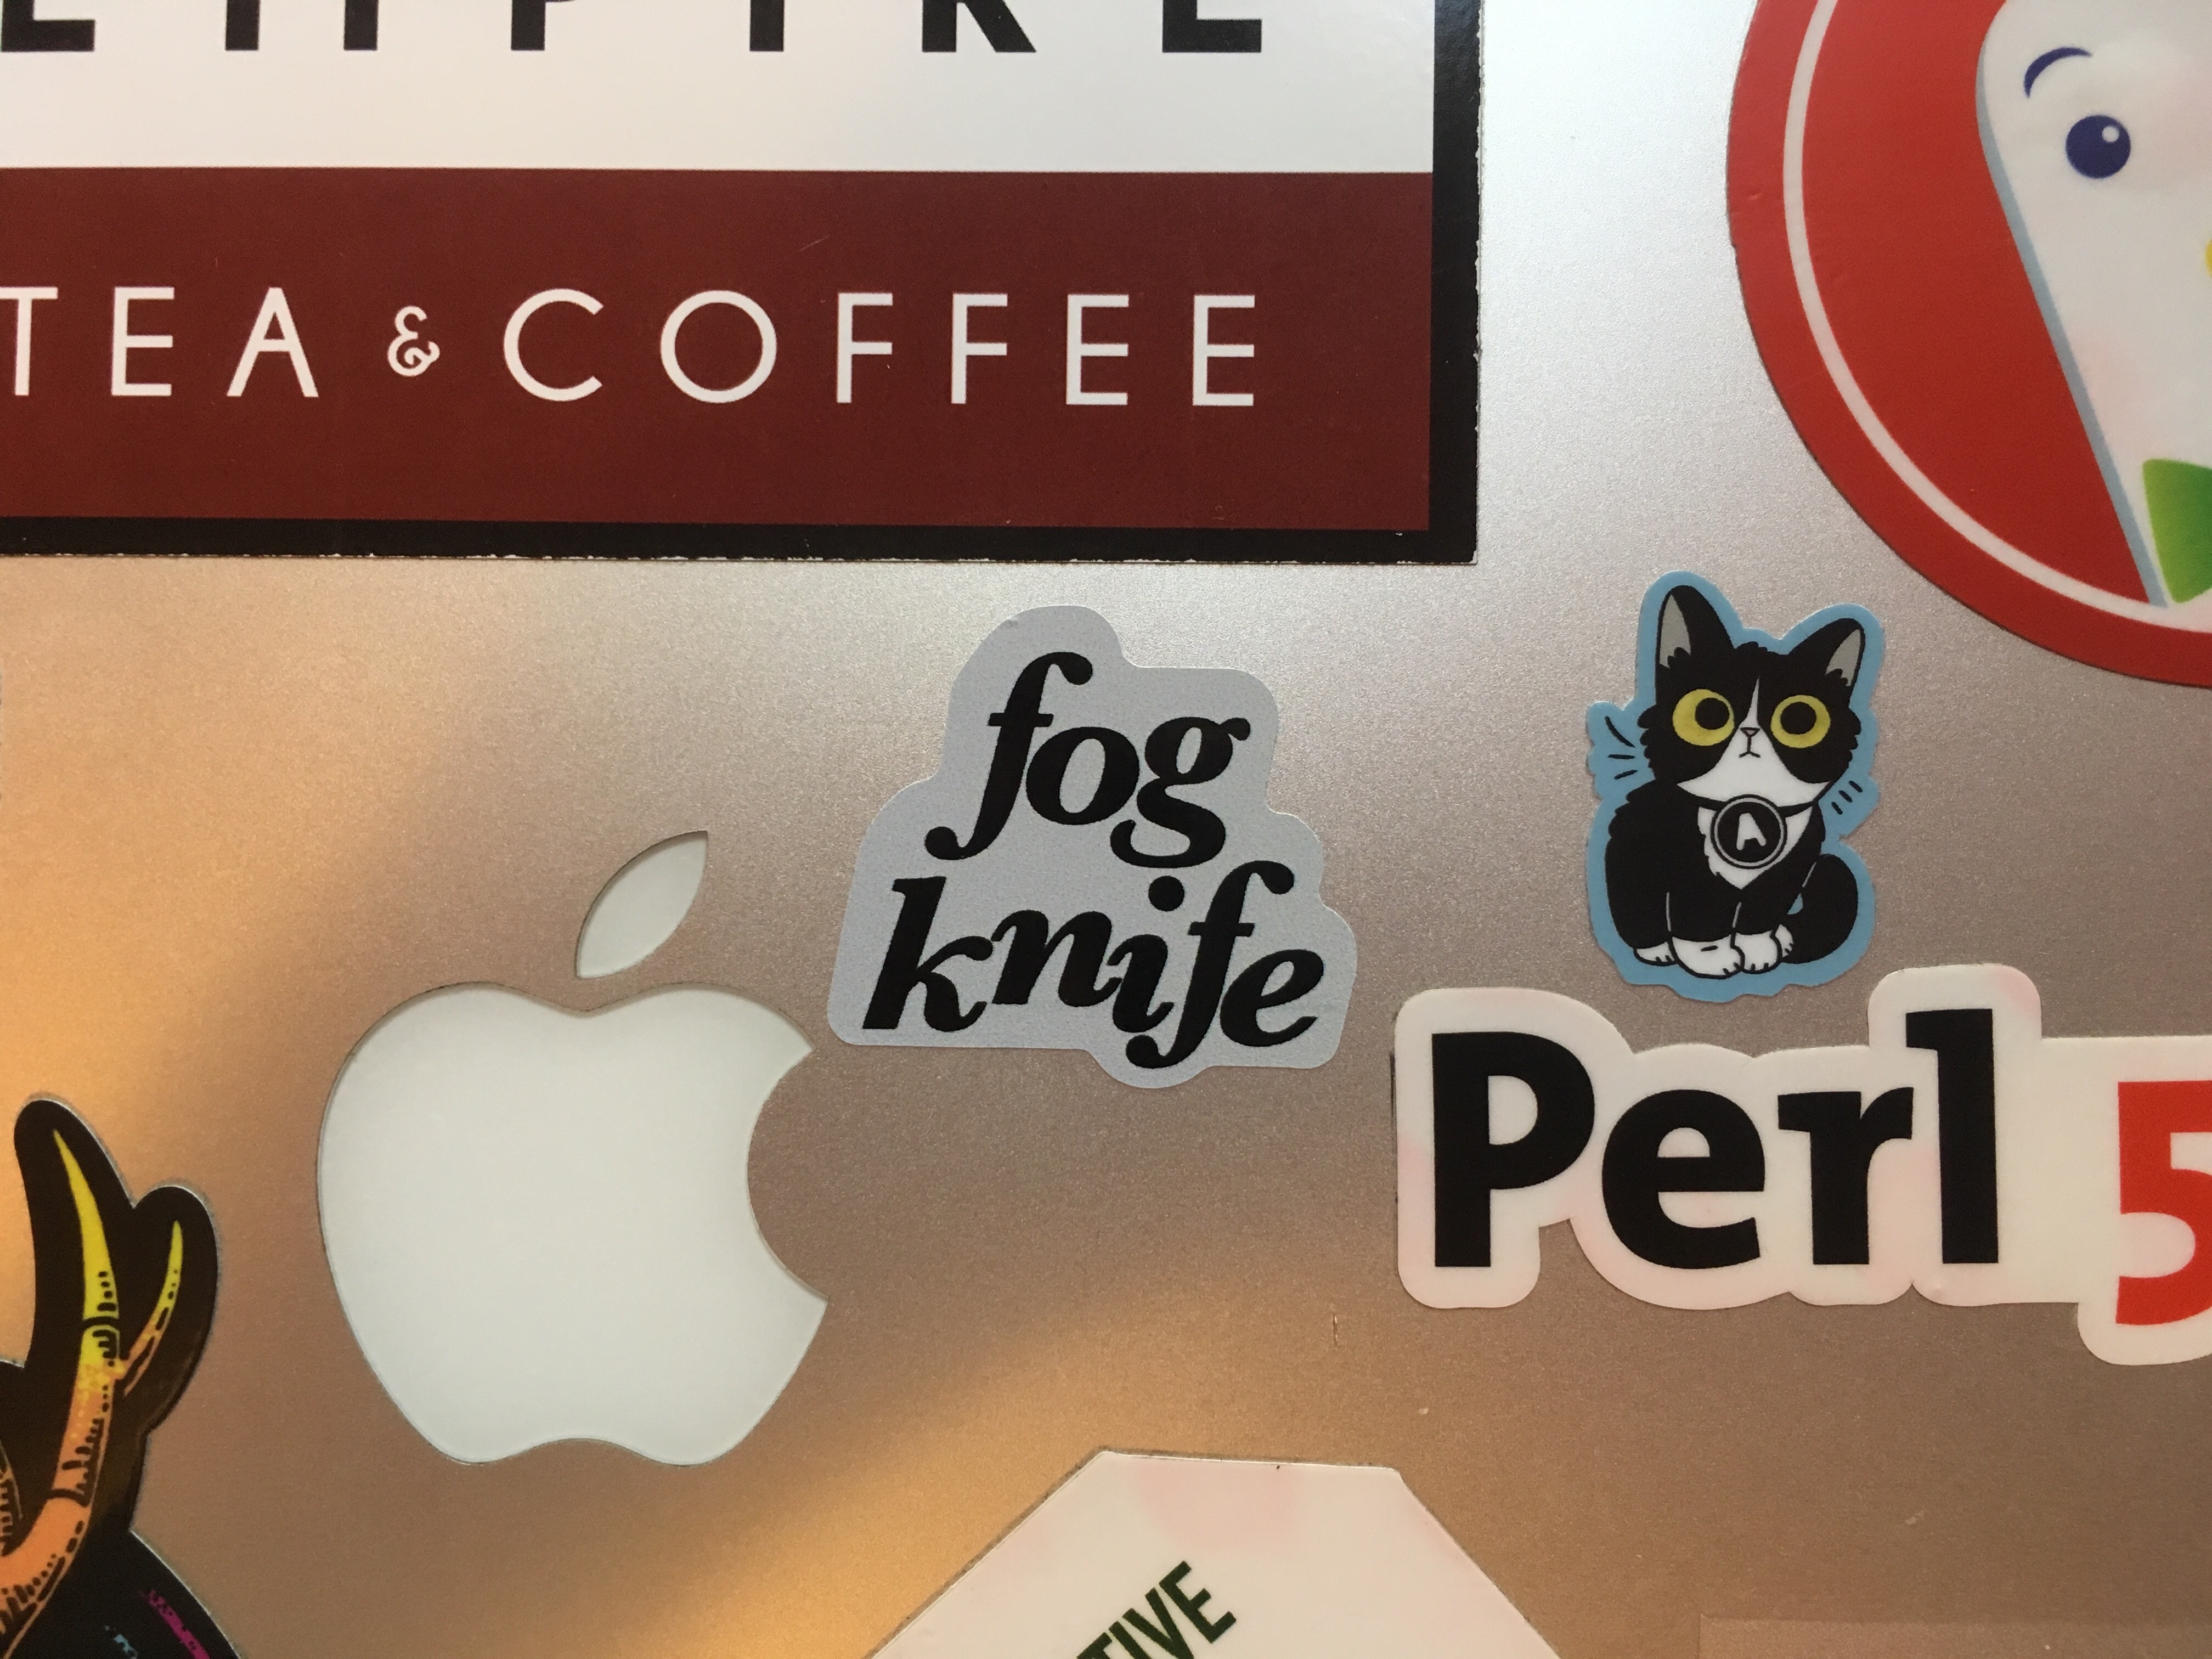 Photograph of a Fogknife sticker on a laptop lid.